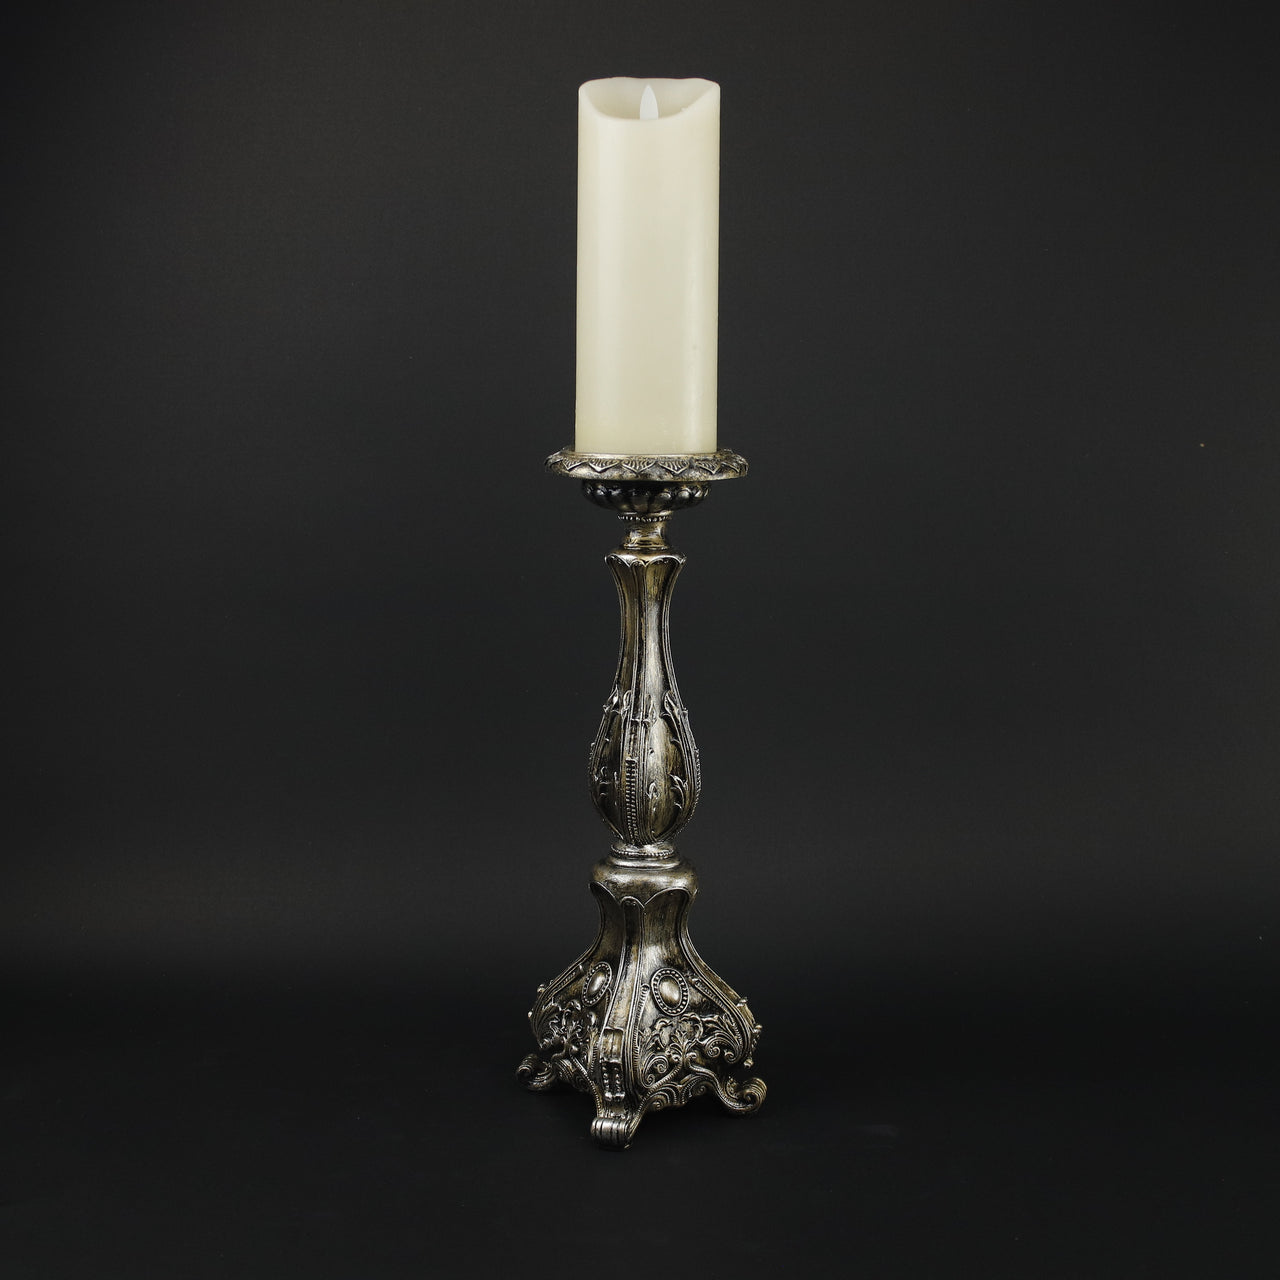 HHD10578 - M Gold Ornate Candle Holder